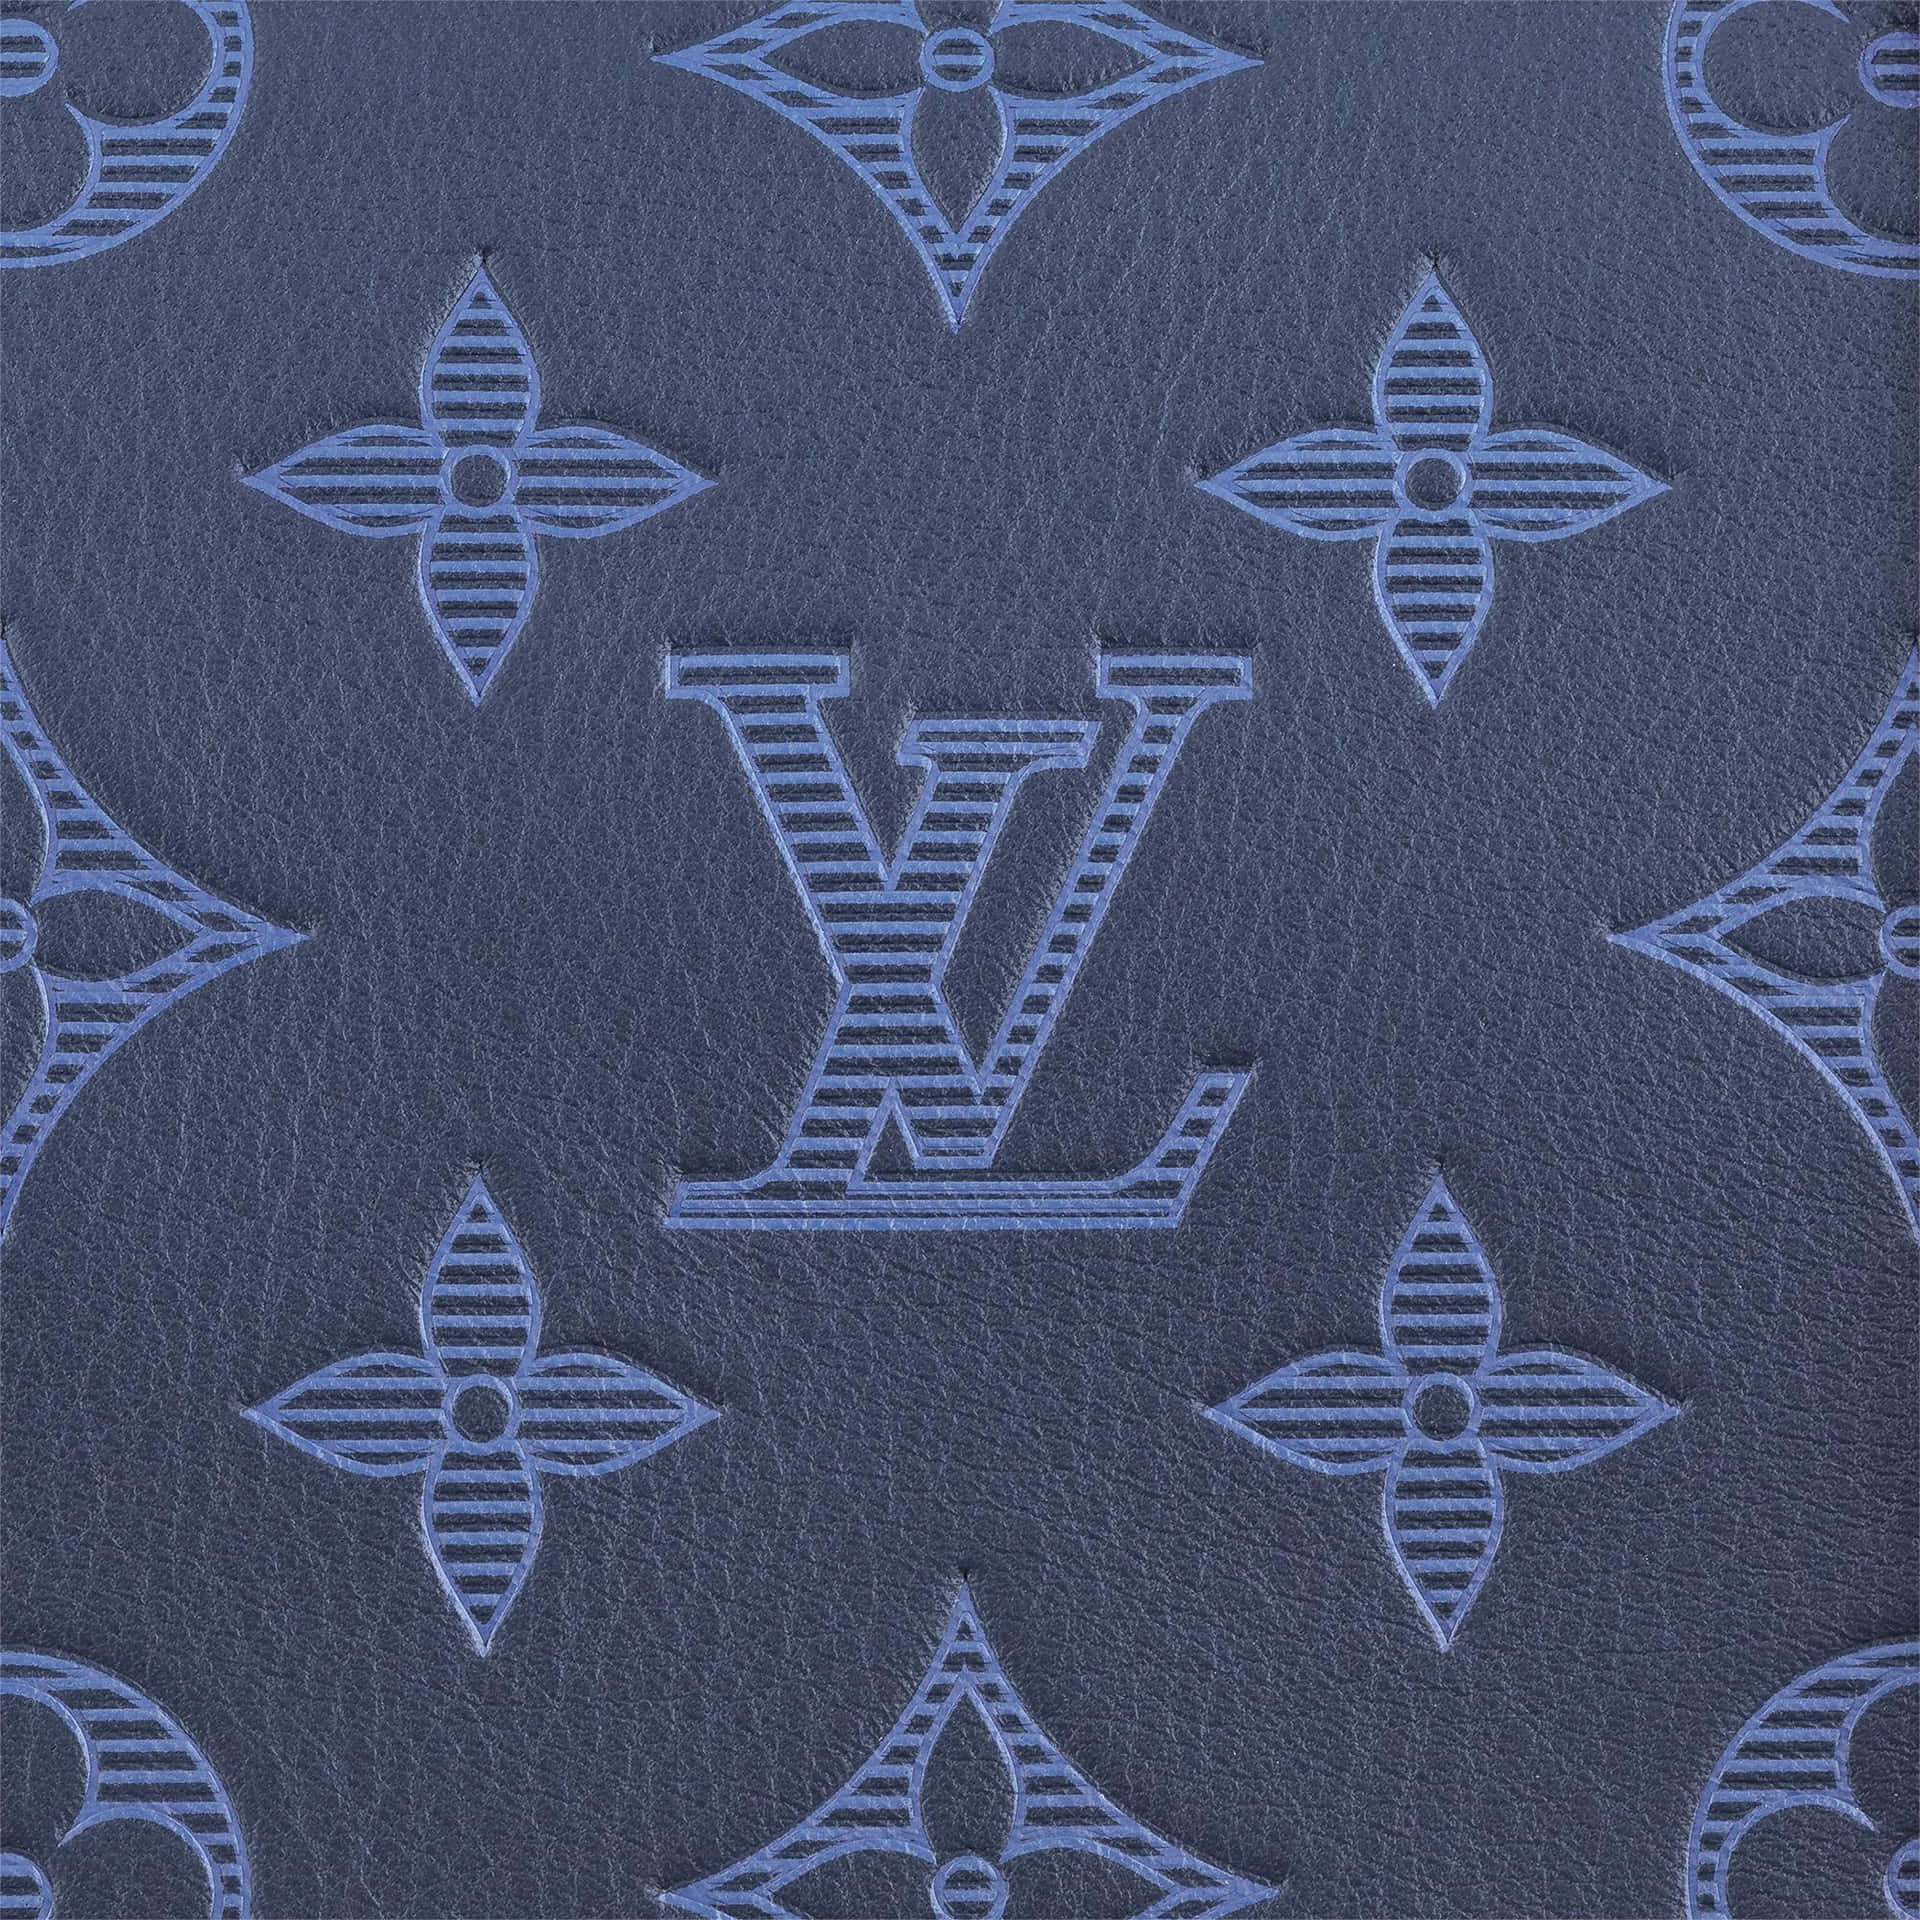 Bold and modern: classic Louis Vuitton style. Wallpaper